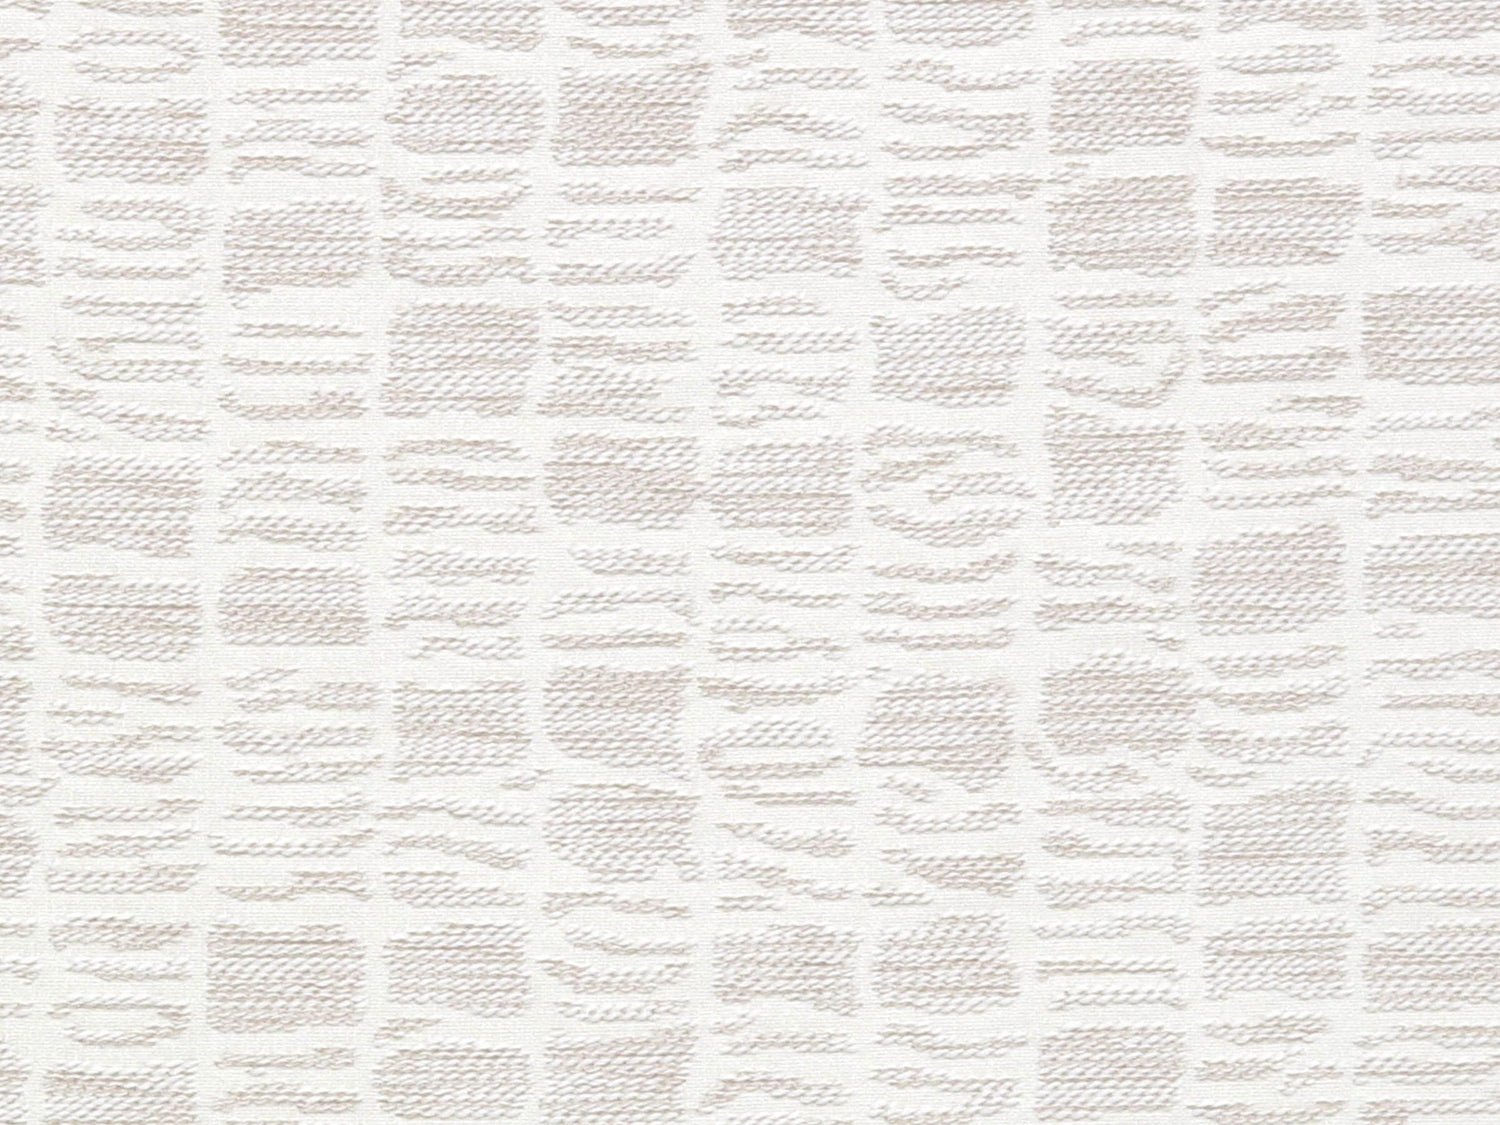 Marble Mountain fabric in winter white color - pattern number LU 00018077 - by Scalamandre in the Old World Weavers collection